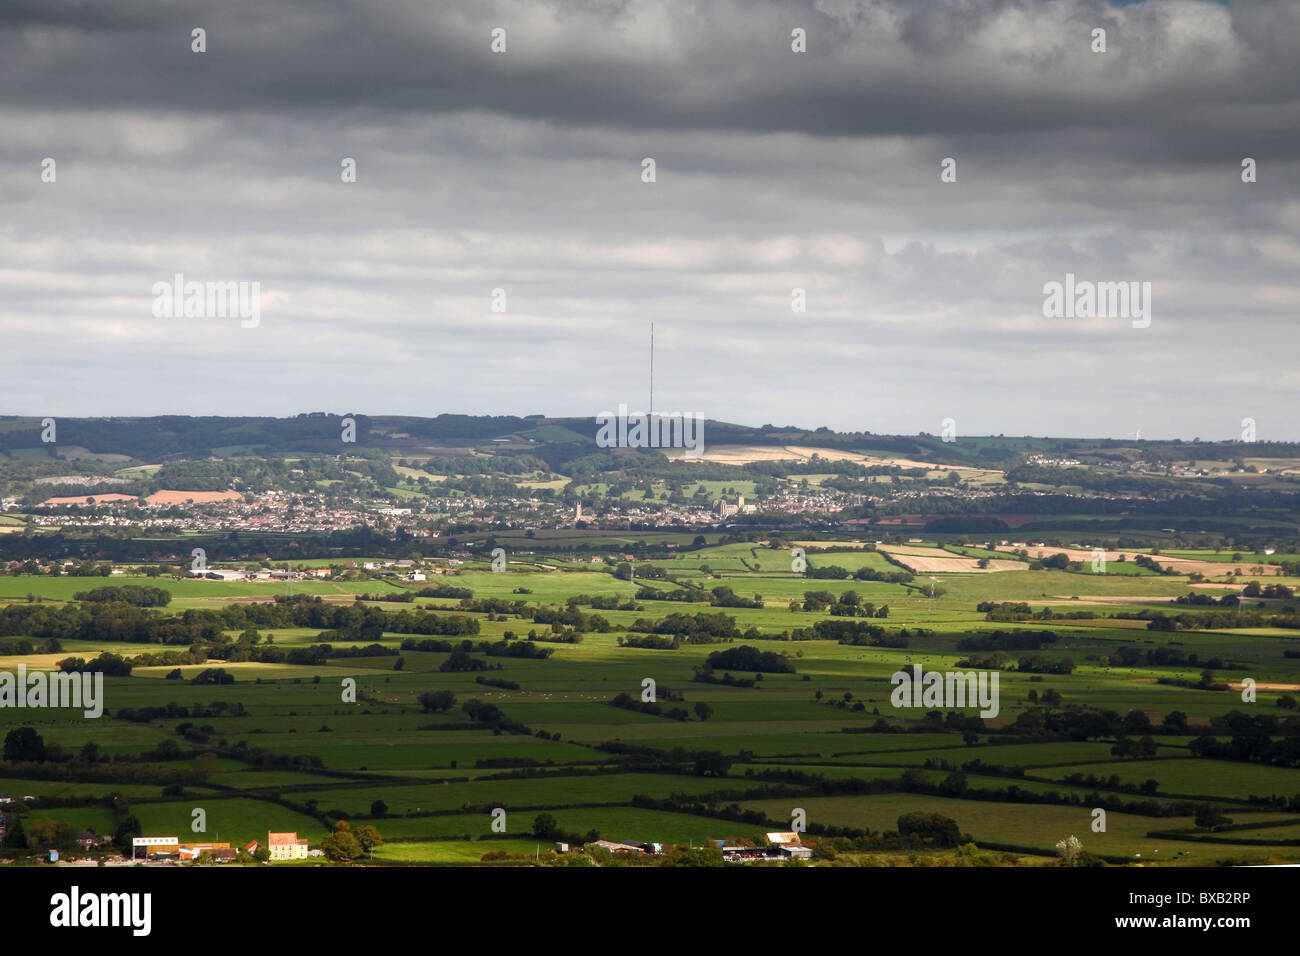 Looking N from Glastonbury Tor towards the Mendip Hills TV transmitter and the city of Wells with its cathedral, Somerset, UK Stock Photo